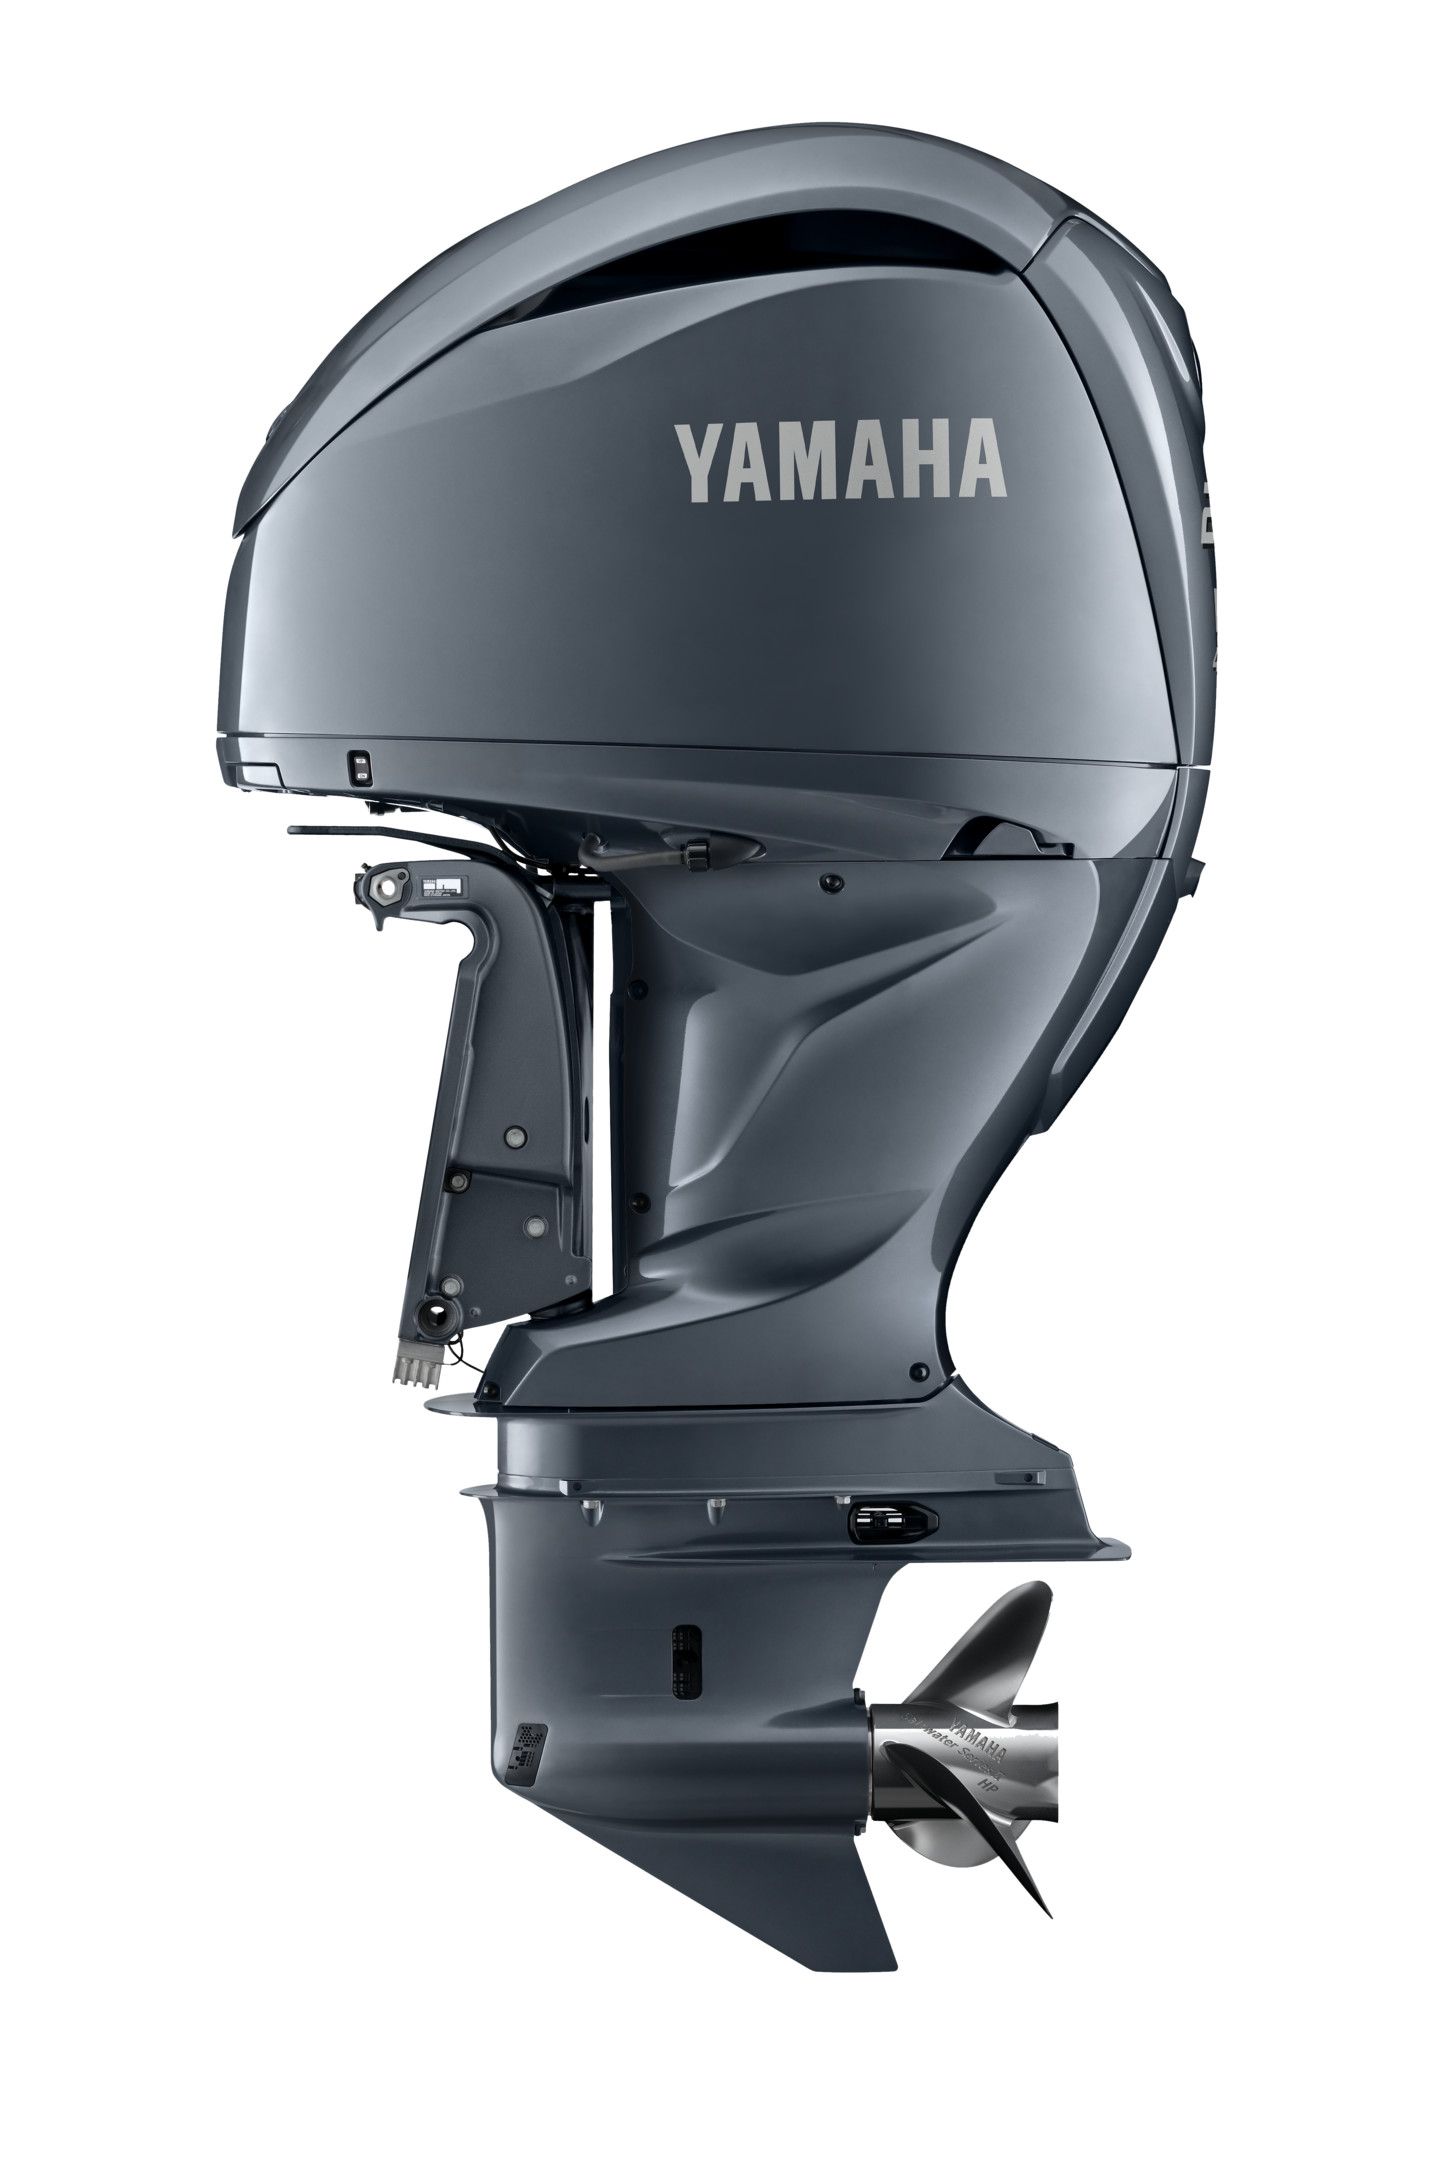 DES(Digital Electric Steering) Pearlescent White Yamaha 4 Stroke 300hp Ultra-Long Shaft EFI OUTBOARD FOR SALE